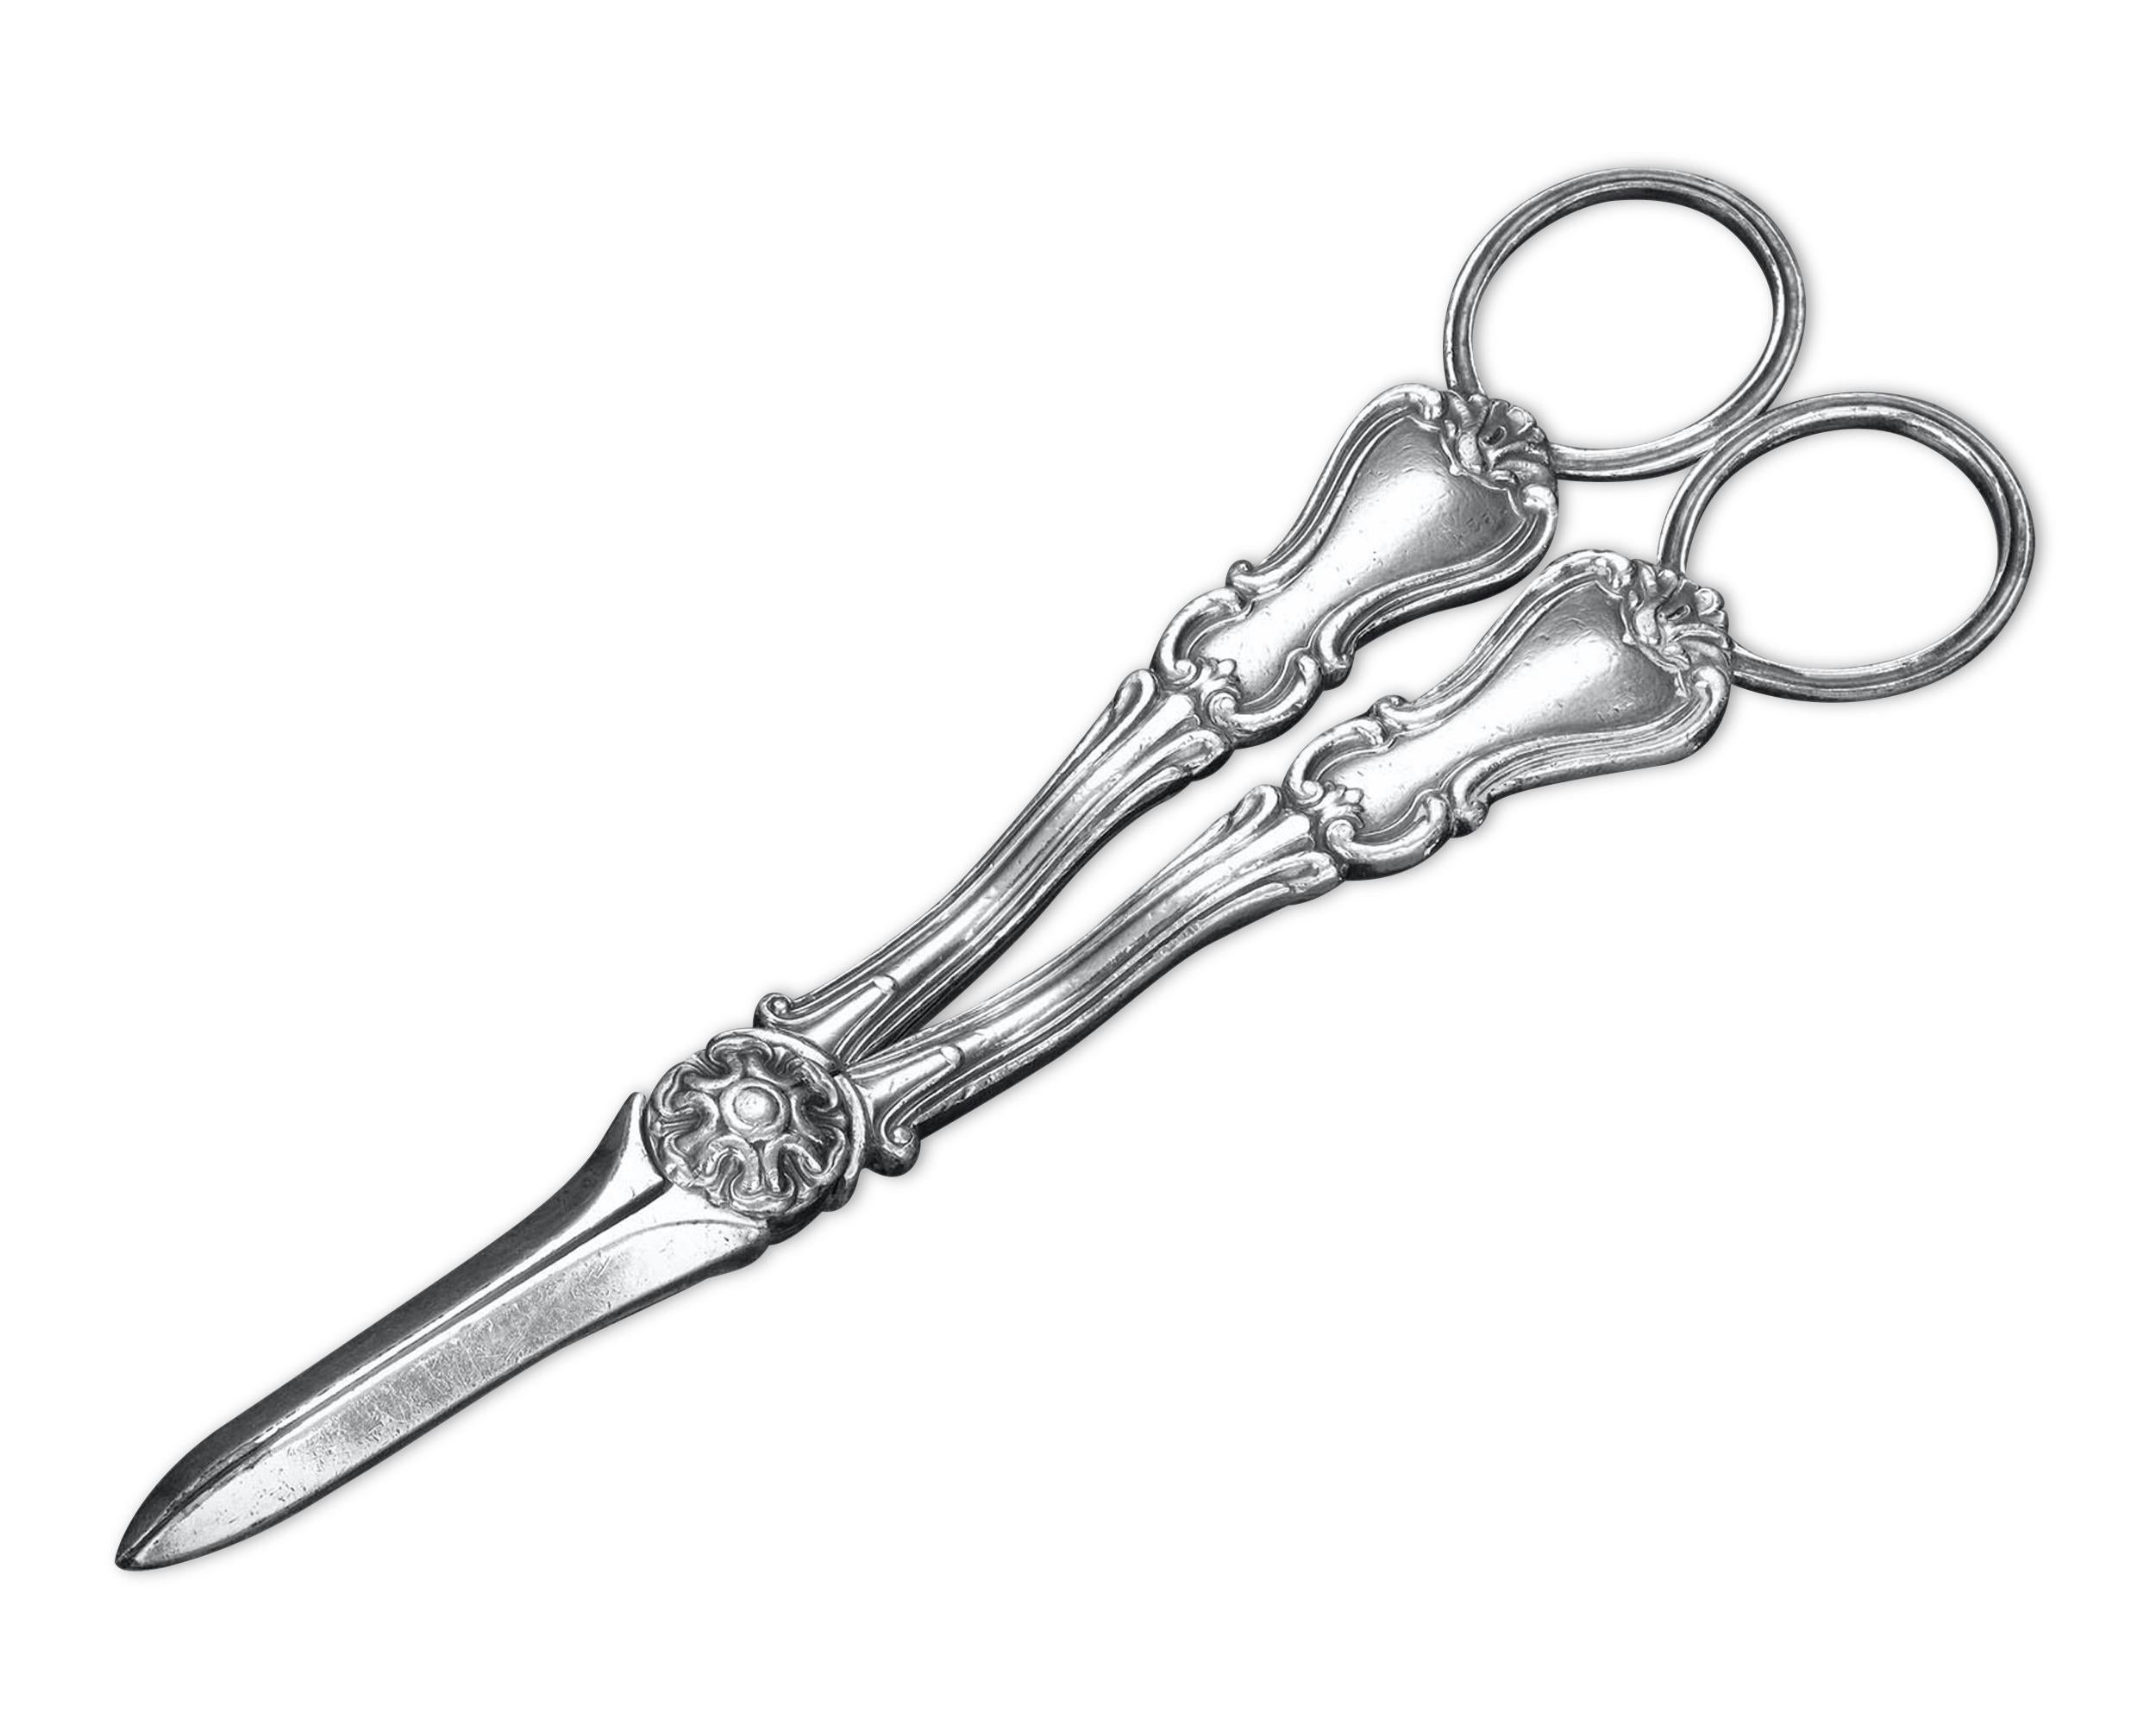 This rare pair of silver grape shears was crafted by Paul Storr, one of history’s most renowned silversmiths. An uncommon item in Storr's extraordinary catalog, this elegant pair of shears boasts a sophisticated neoclassical design, and contains all